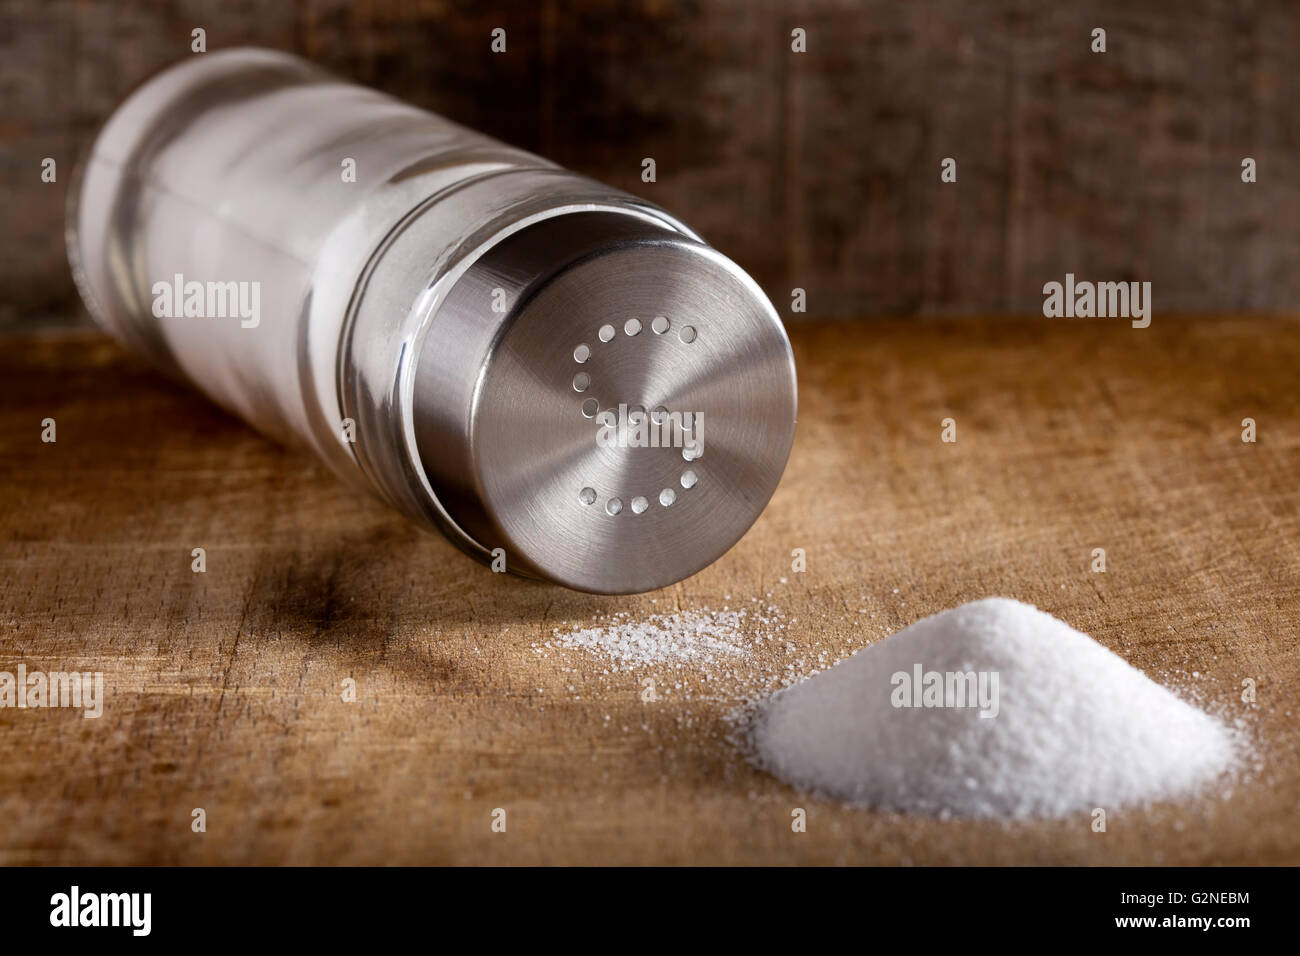 Lying down glass salt cellar and spilled salt on a wood background Stock Photo